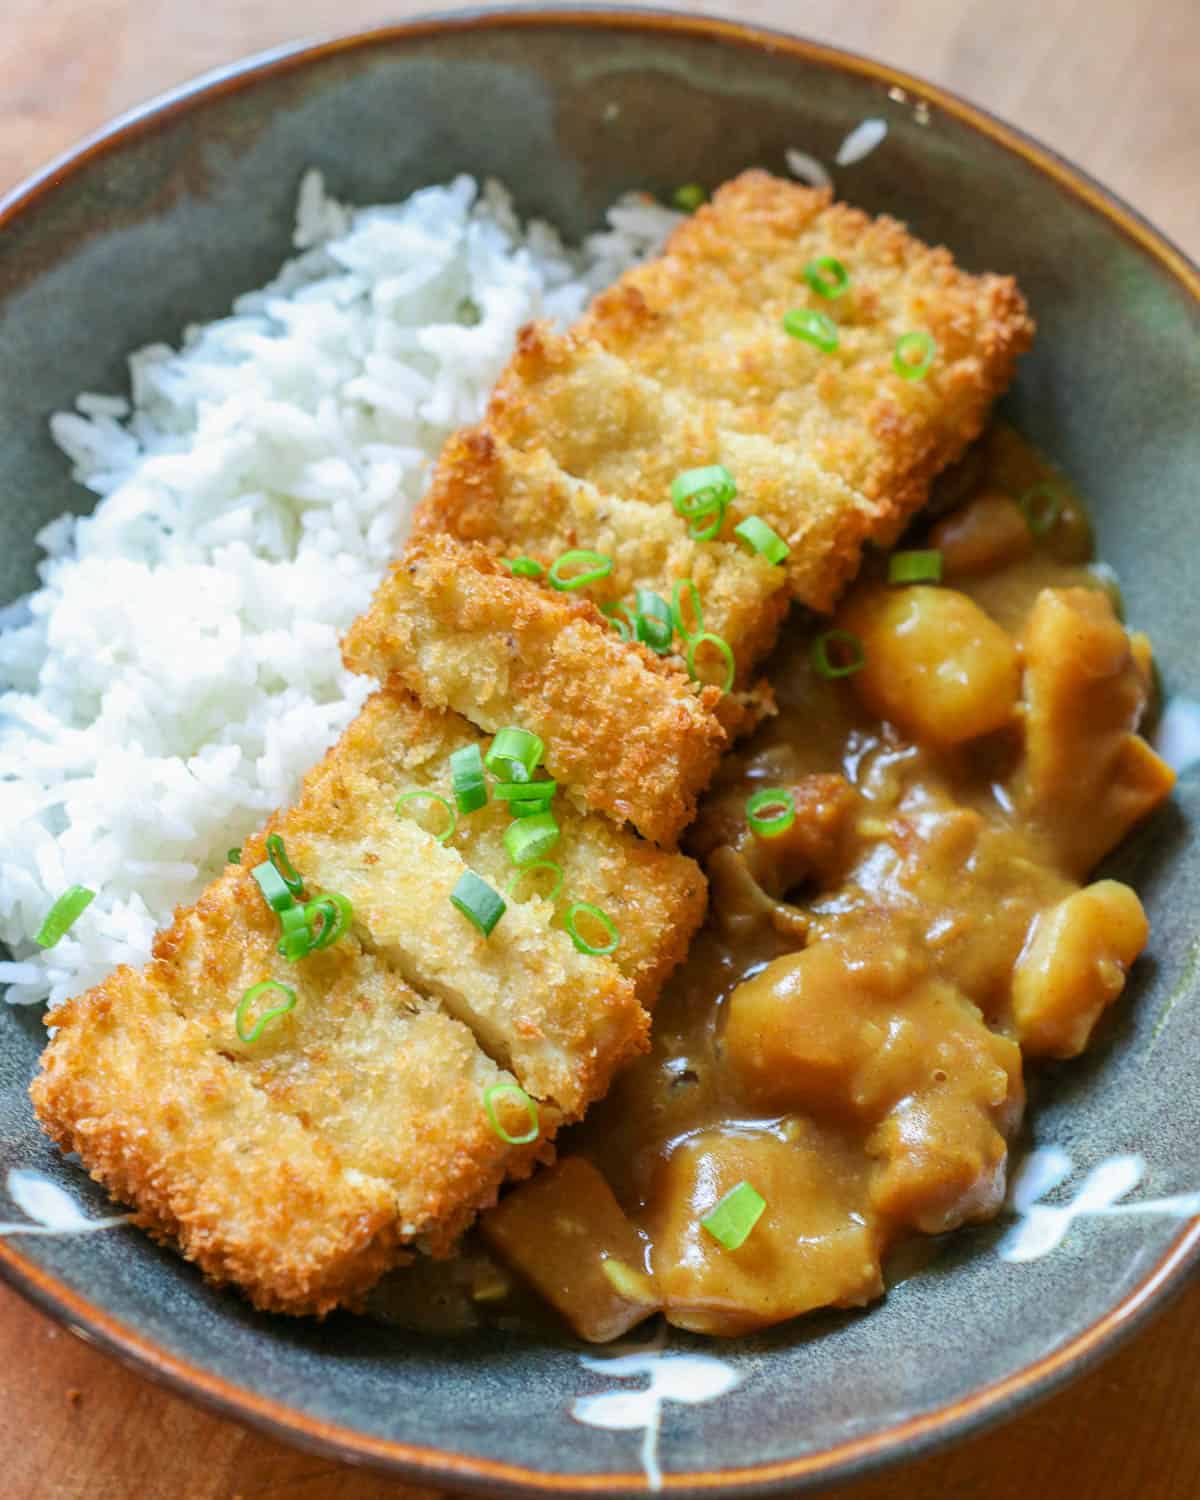 A crispy tofu katsu cutlet, sliced and served with white rice, Japanese curry, topped with scallions.